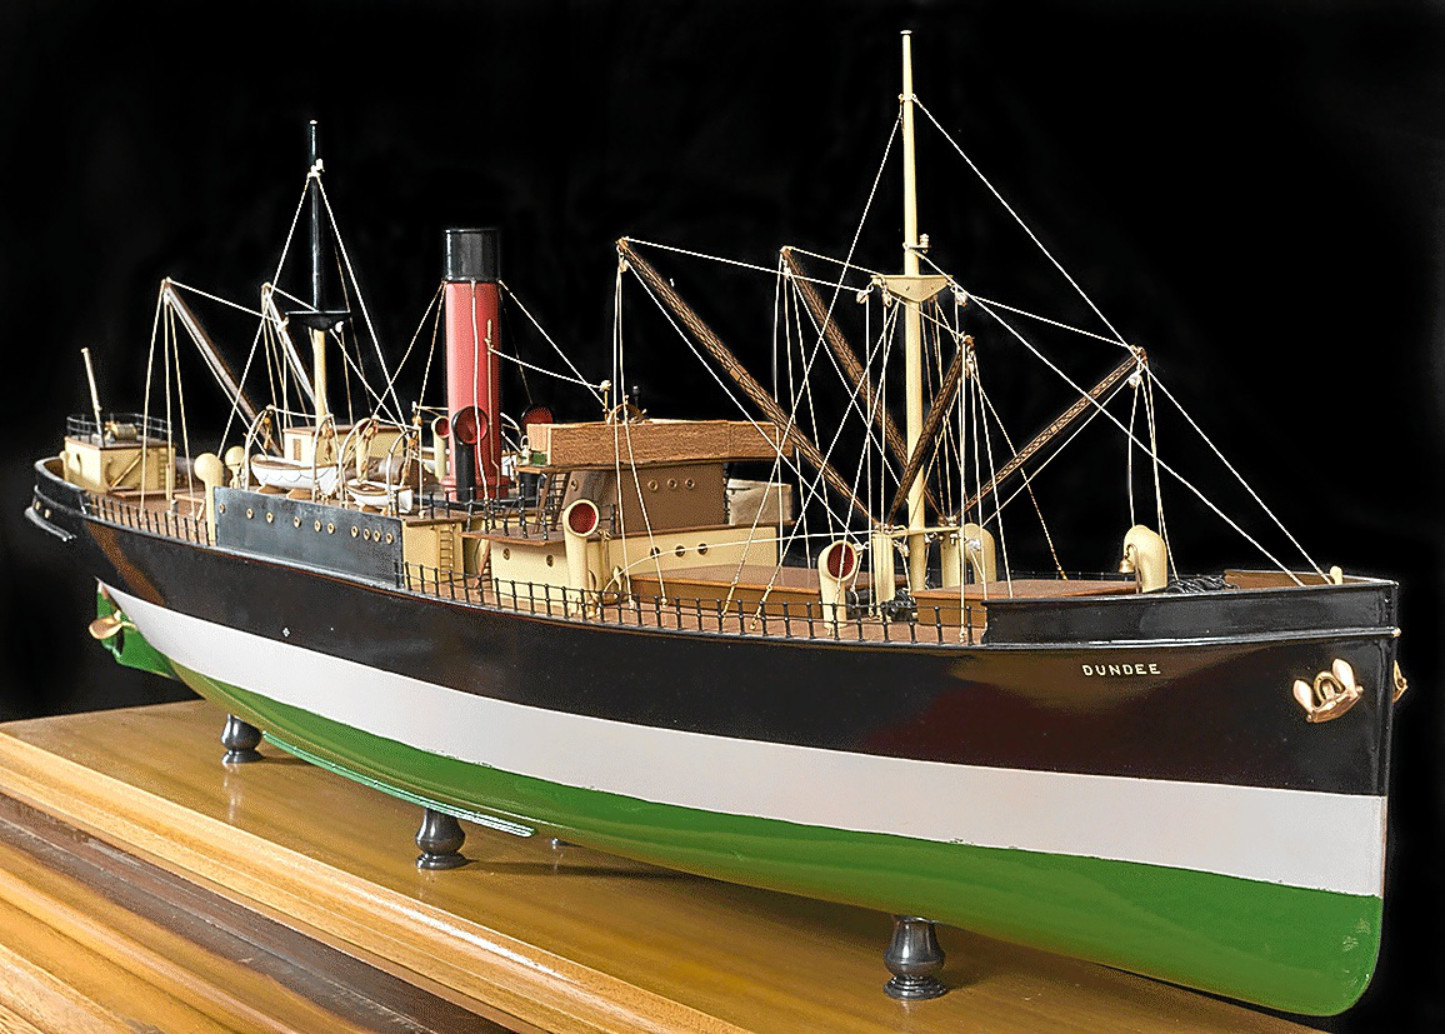 One of the models going on display.